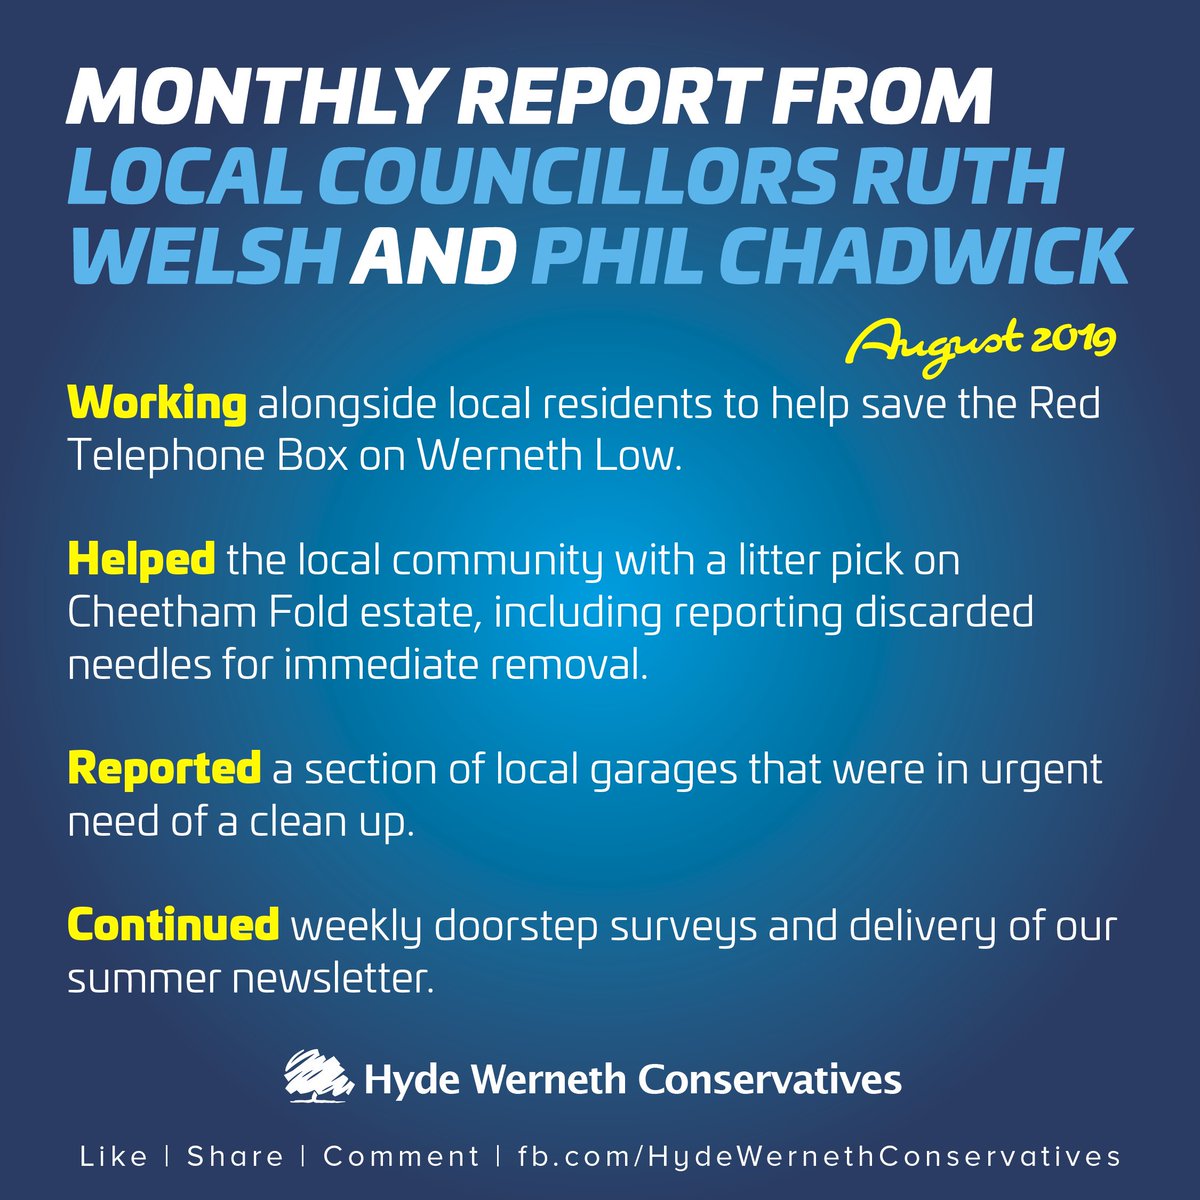 As your local ward councillors, Ruth Welsh and I always work hard in our community, this is just a sample of the work we do. Our residents know that we work hard for them all year round. #MonthlyReport #Conservatives #Conservative #HydeWerneth #workhardplayhard